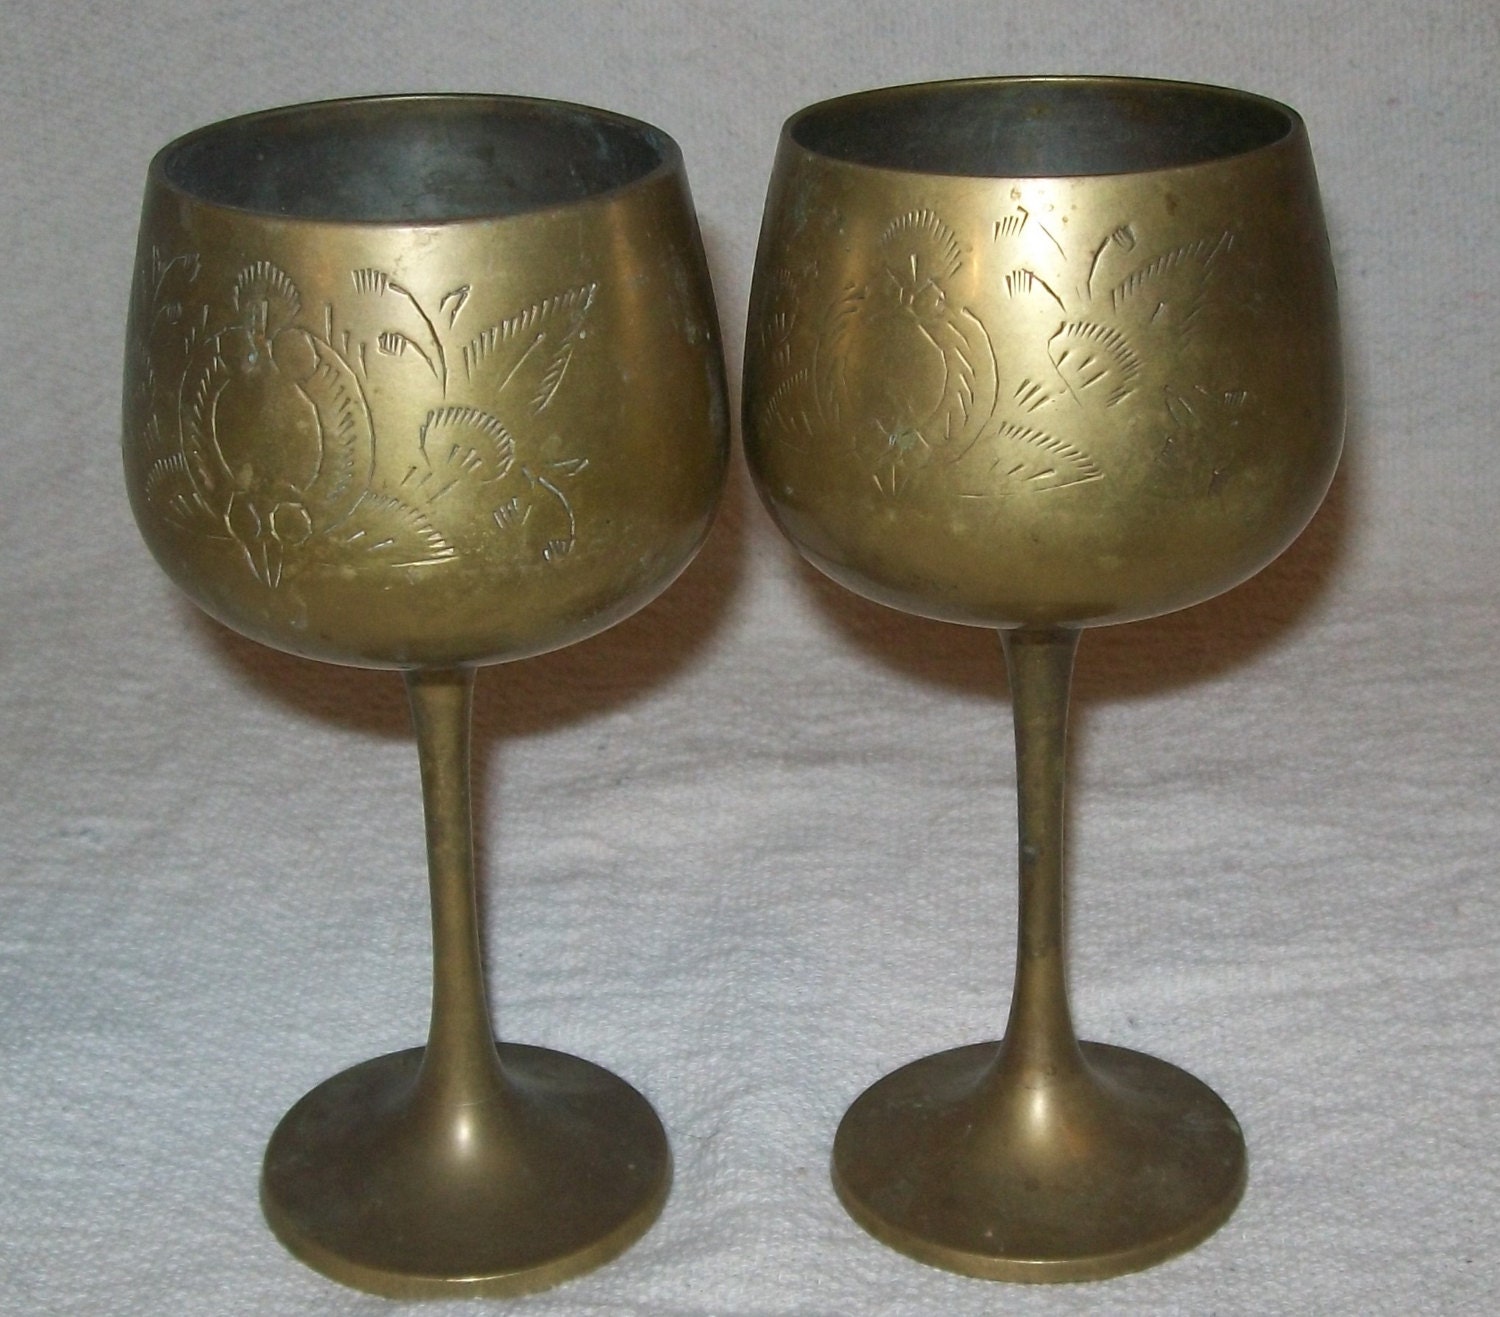 Vintage Brass Wine Goblets By Susieqgeneralstore On Etsy